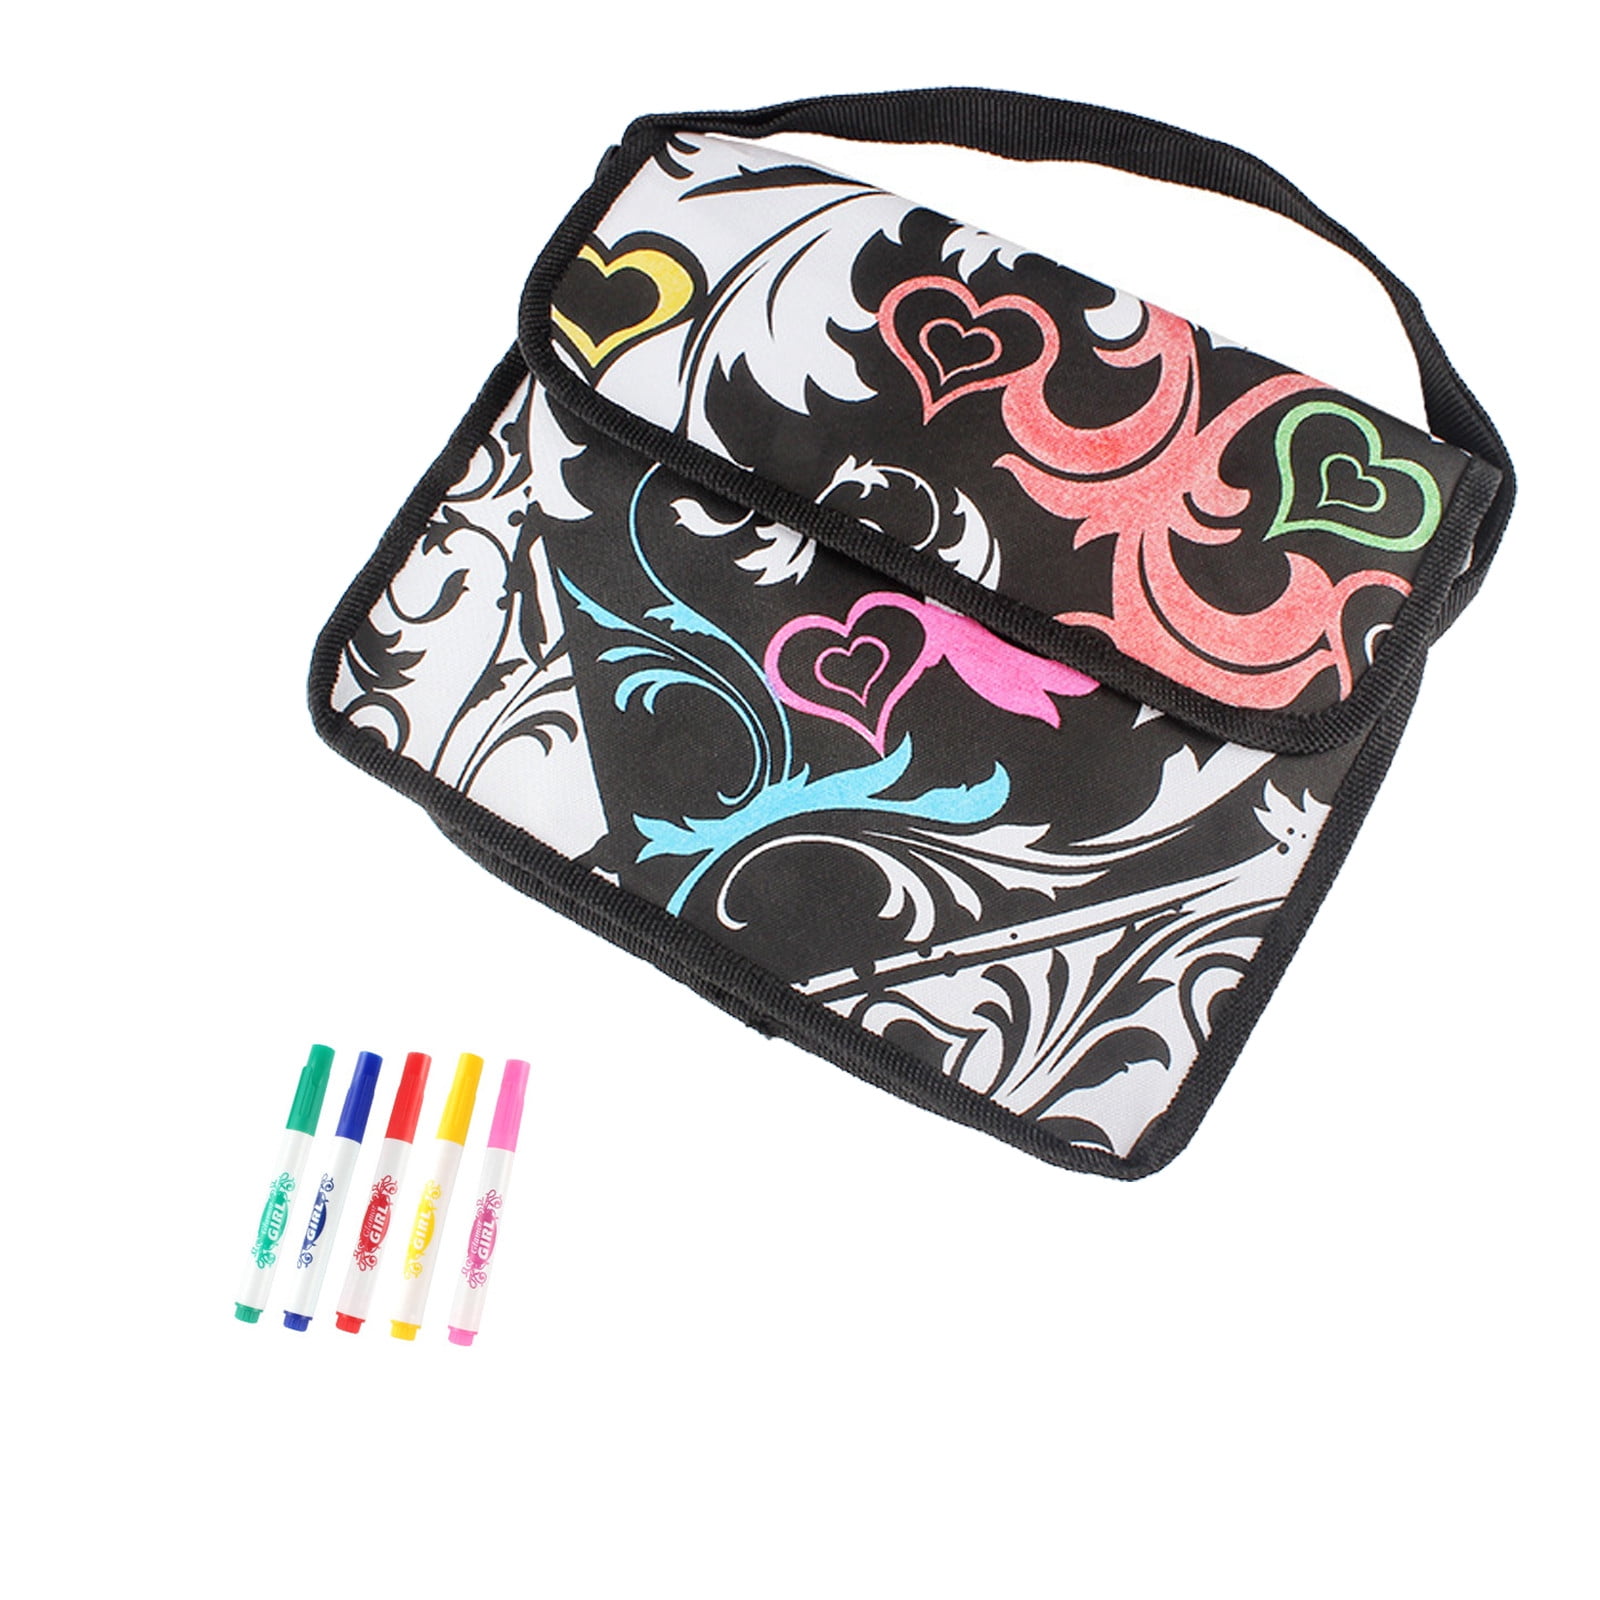 Toy Toys Hand Painted Graffiti Coloring Personalize Paintable Diy Backpack Gift 30ml Walmart Com